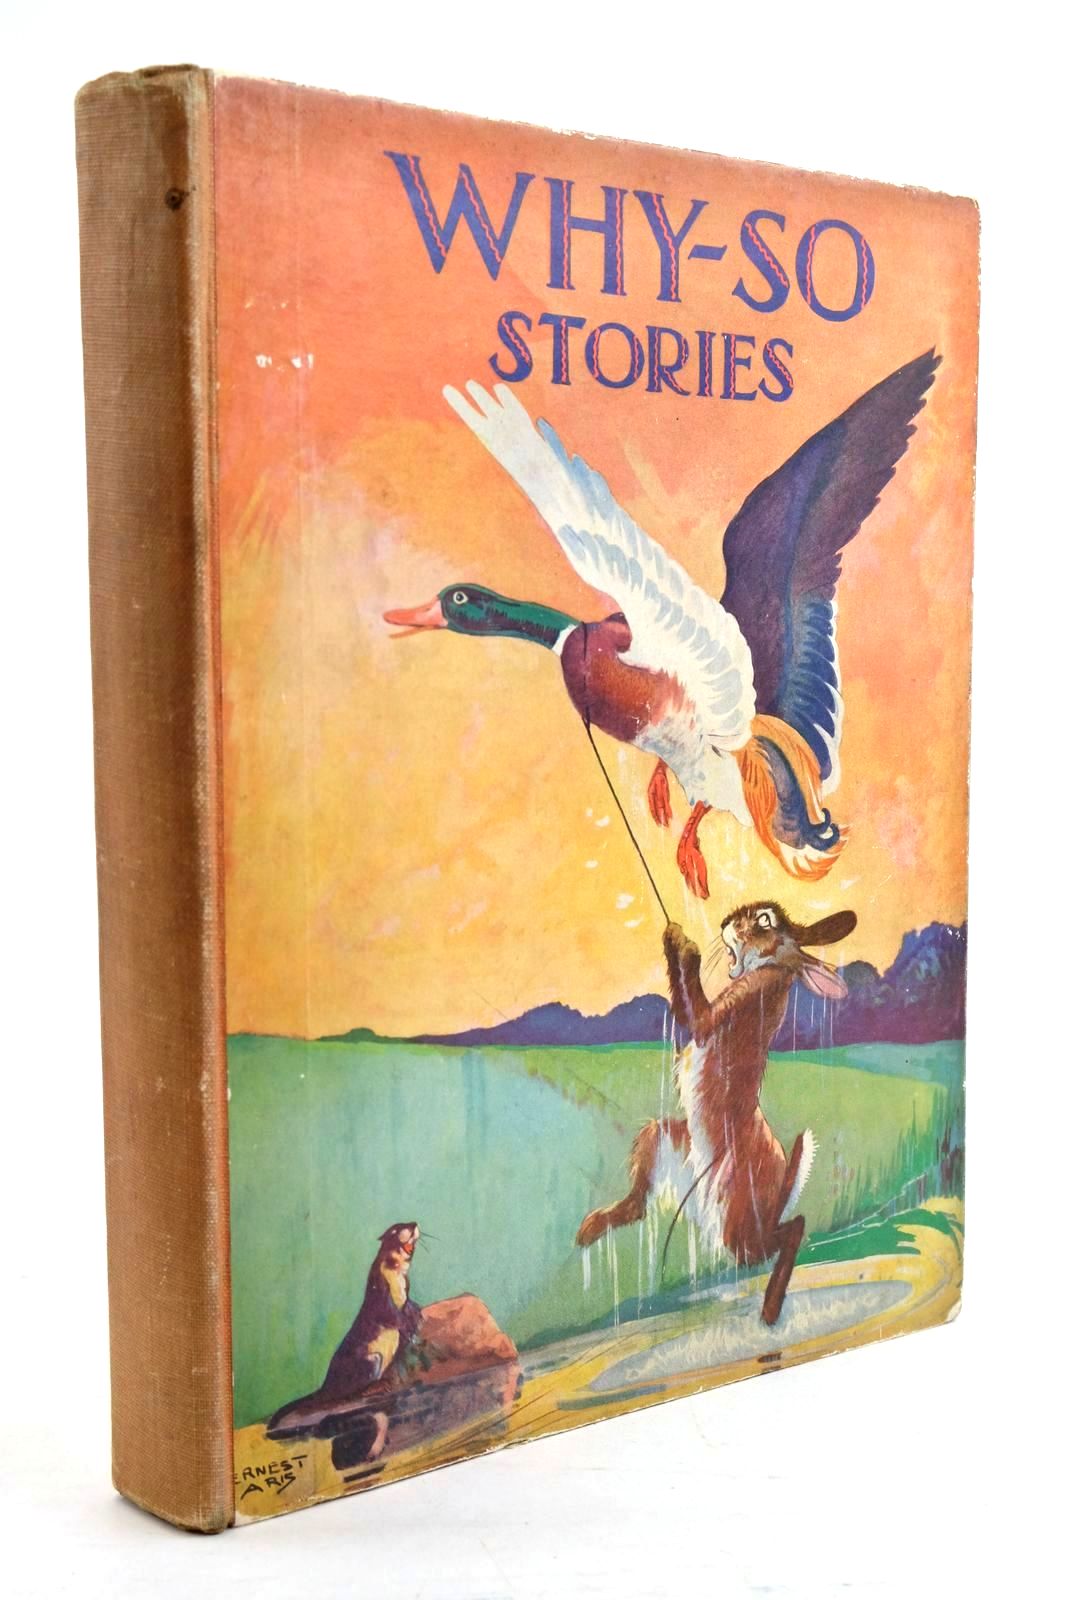 Photo of WHY-SO STORIES OF BIRDS & BEASTS FROM FOLK-LORE & LEGEND written by Rich, Edwin Gile illustrated by Copeland, Charles
Aris, Ernest A.
et al., published by George G. Harrap & Co. Ltd. (STOCK CODE: 1321014)  for sale by Stella & Rose's Books